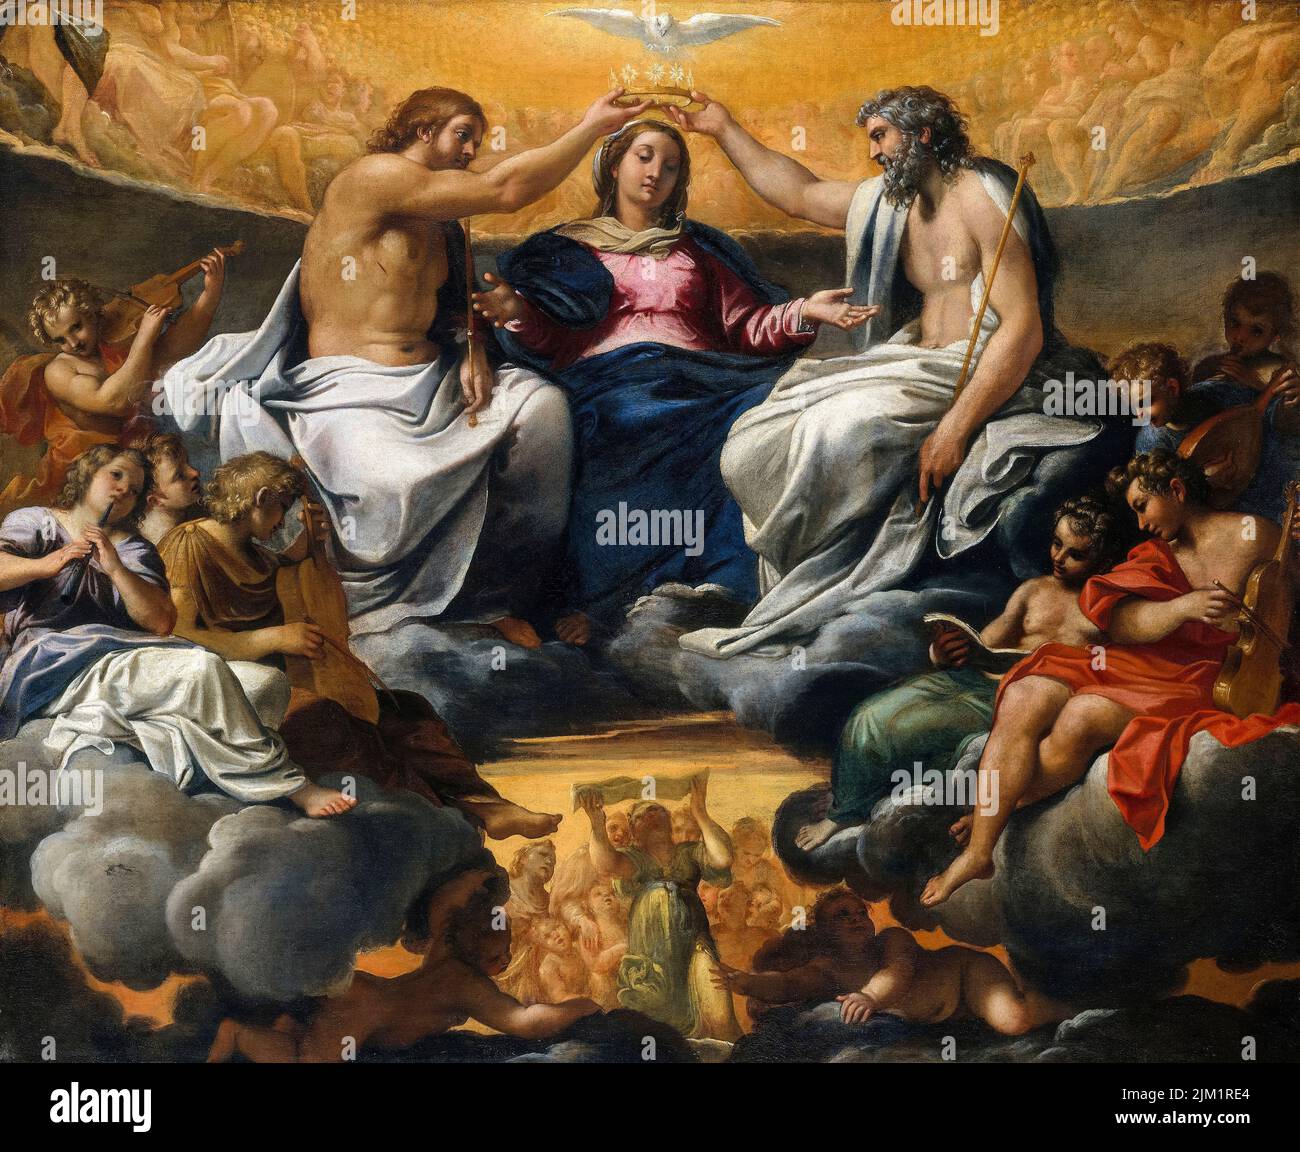 The Coronation of the Virgin, painting in oil on canvas by Annibale Carracci, after 1595 Stock Photo